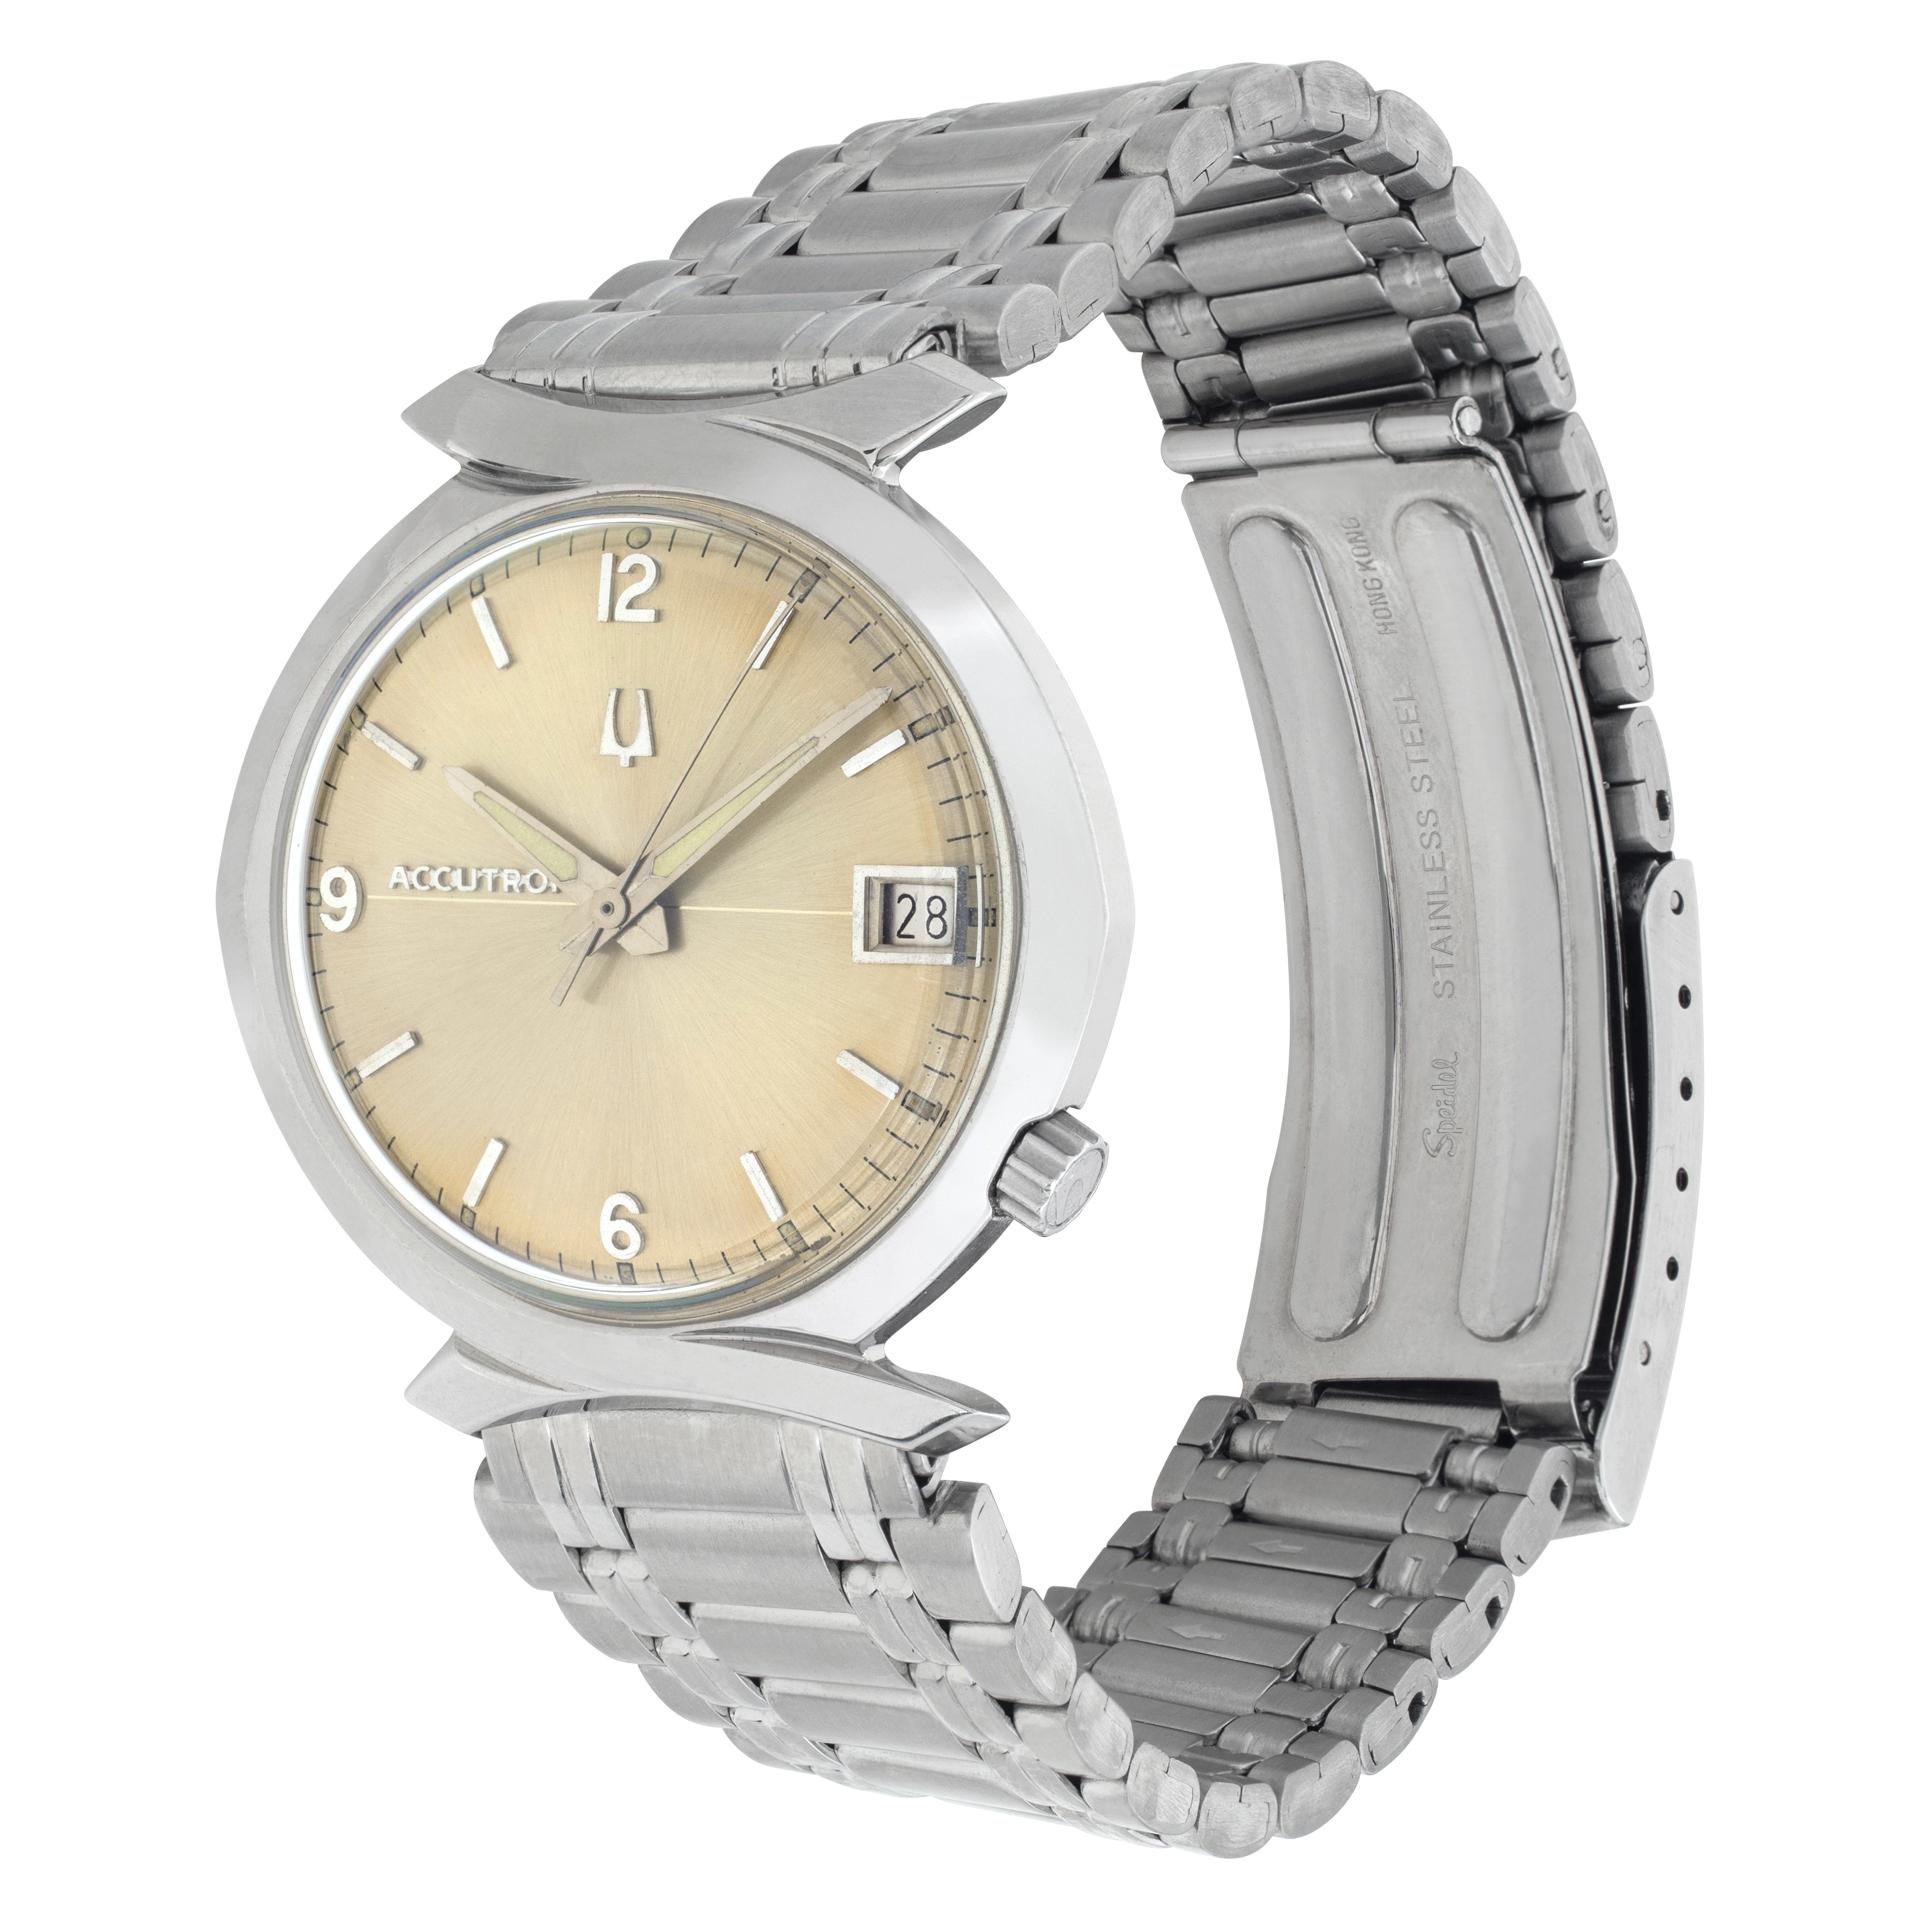 Gents Bulova stainless steel case, stainless steel bezel, stainless steel oyster band with clasp clasp. Manual movement. Certified pre-owned. Fine Pre-owned Bulova Watch. Certified preowned Bulova C72972 watch is made out of Stainless steel on a